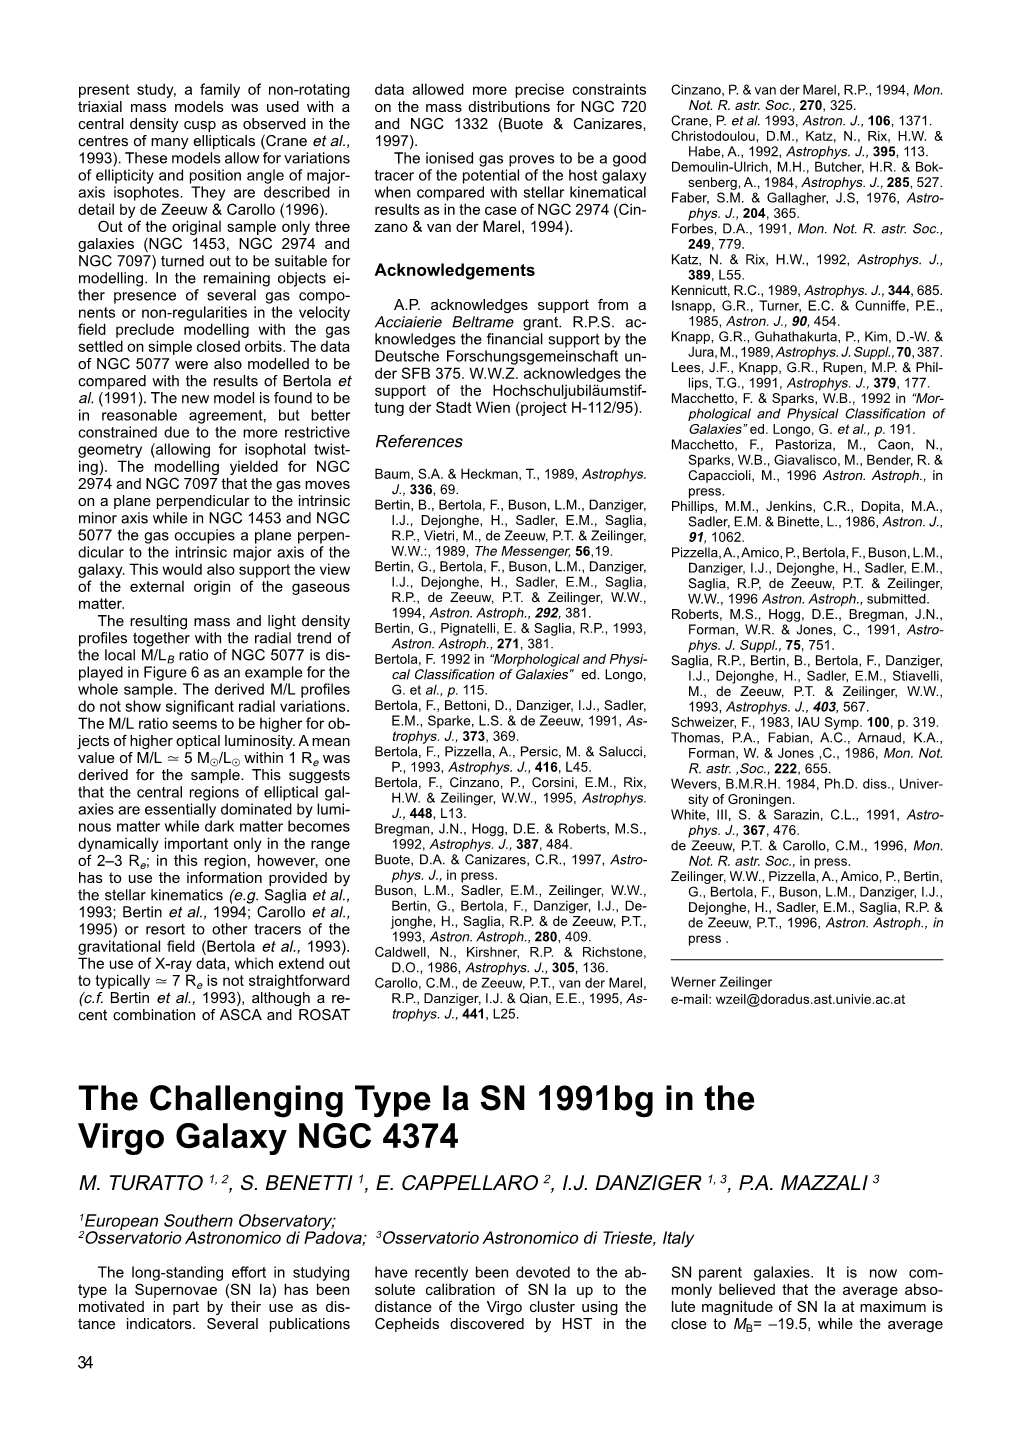 The Challenging Type Ia SN 1991Bg in the Virgo Galaxy NGC 4374 M